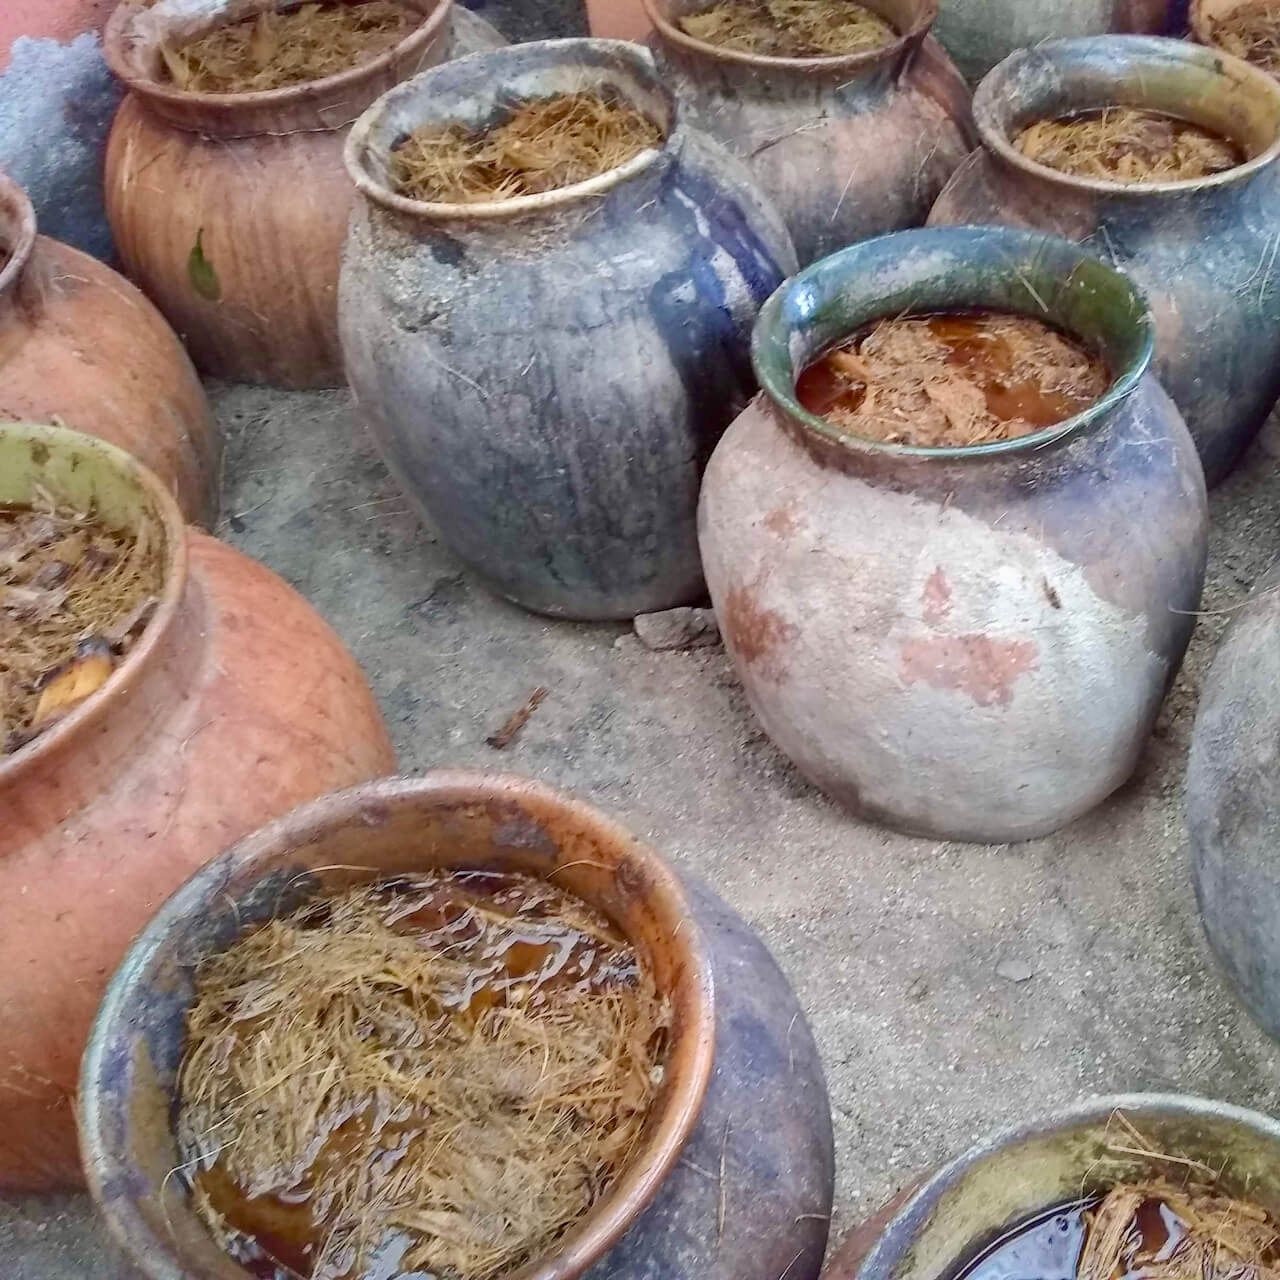 Clay pots filled with fermenting agave